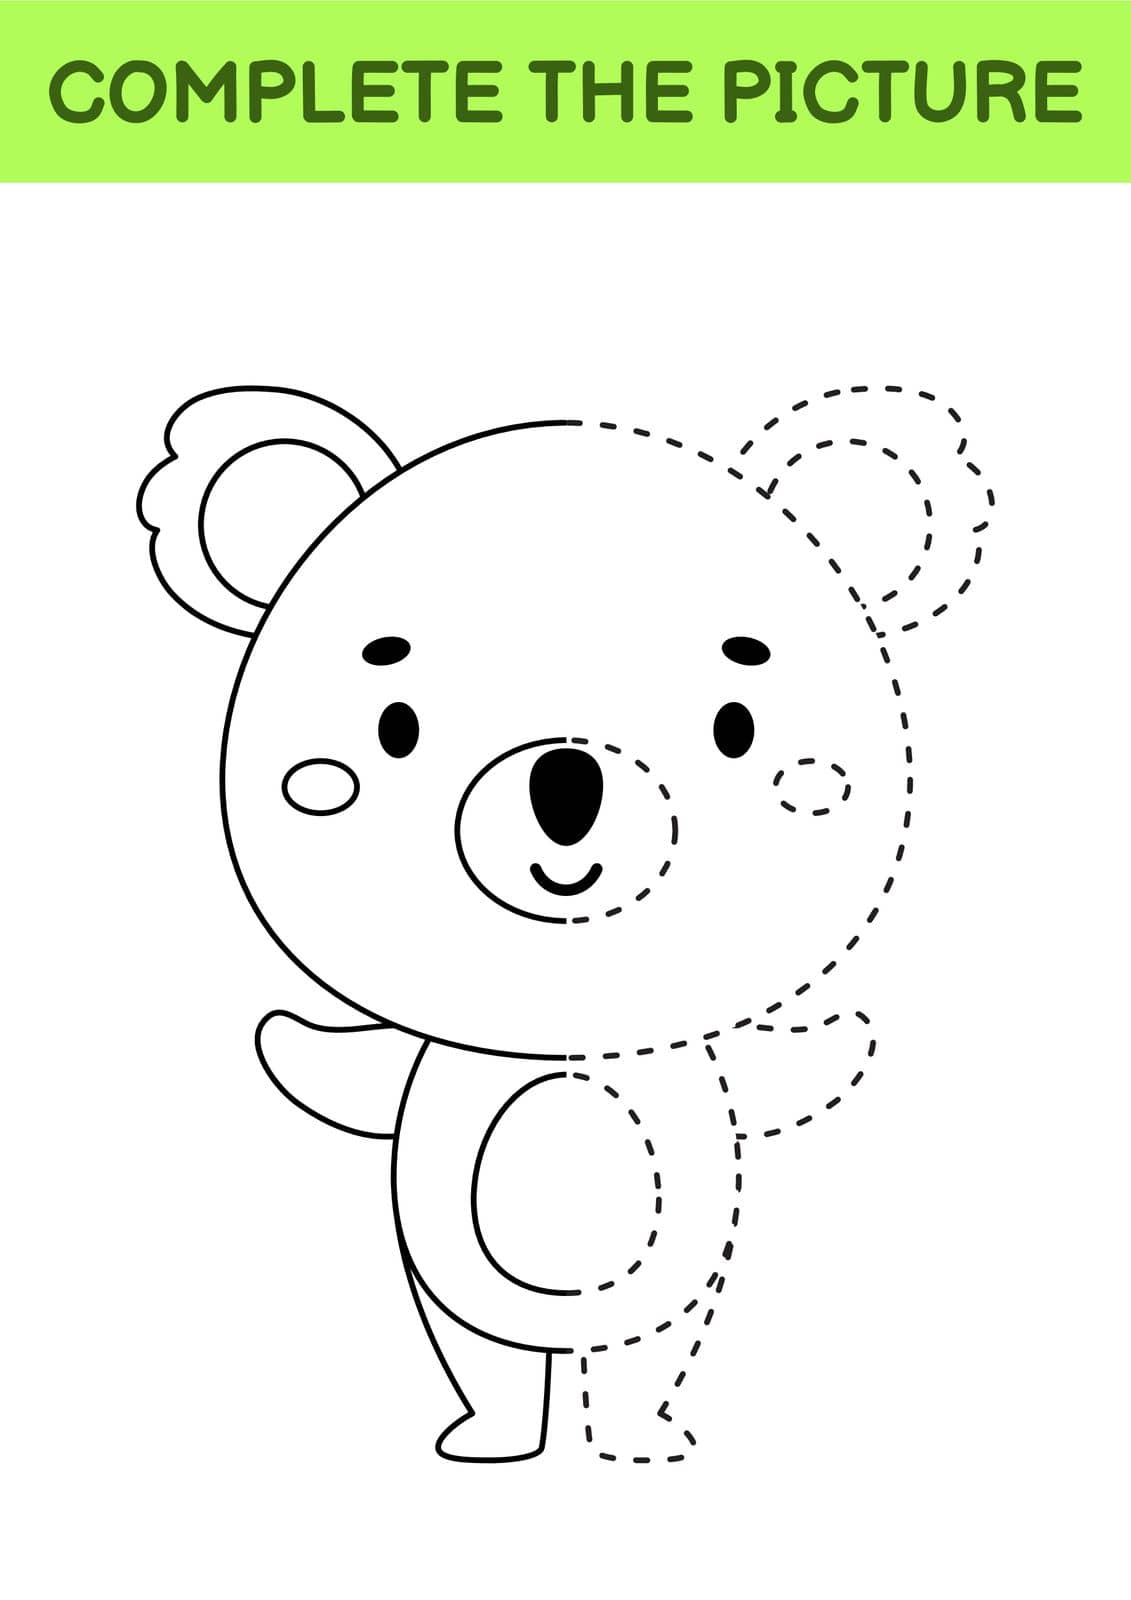 Complete drawn picture of cute koala. Coloring book. Dot copy game. Handwriting practice, drawing skills training. Education developing printable worksheet. Activity page. Vector illustration by Melnyk